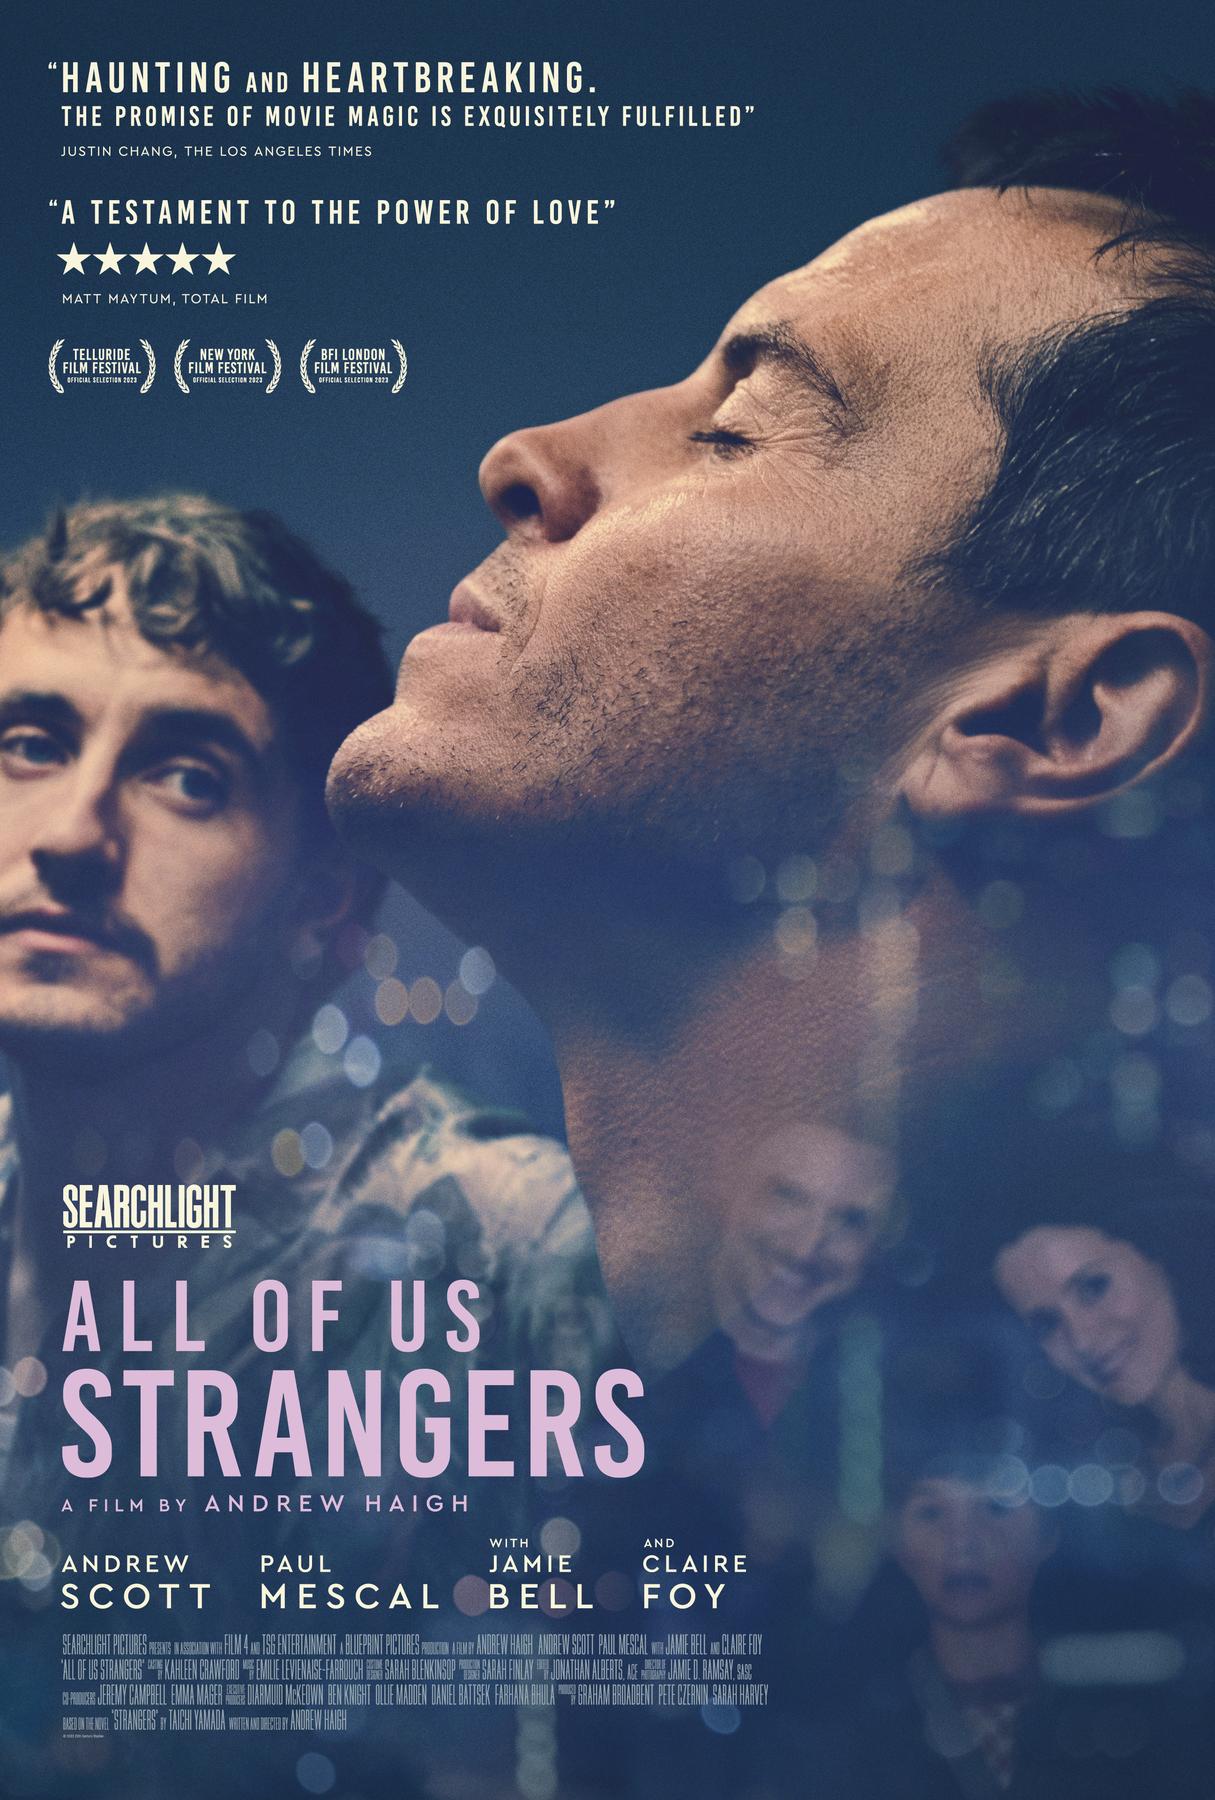 Promotional poster for the movie All Of Us Strangers